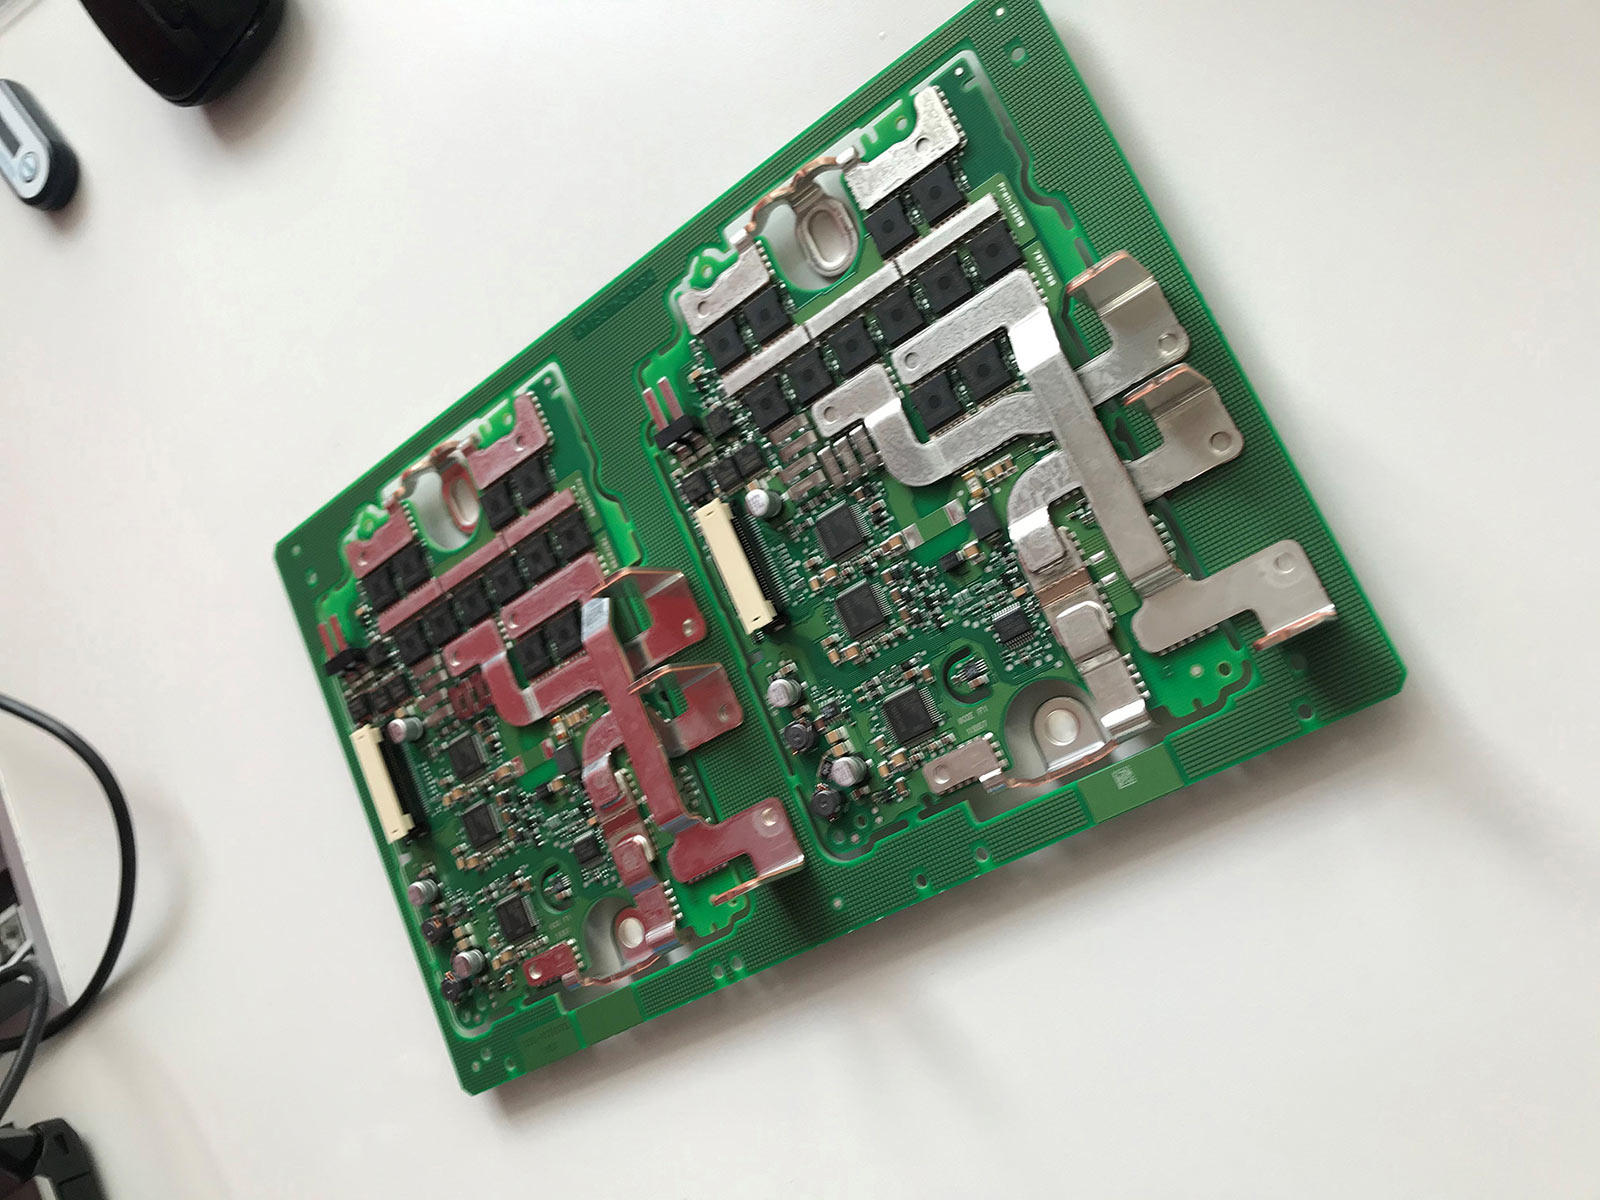 The boards are efficiently produced as dual modules